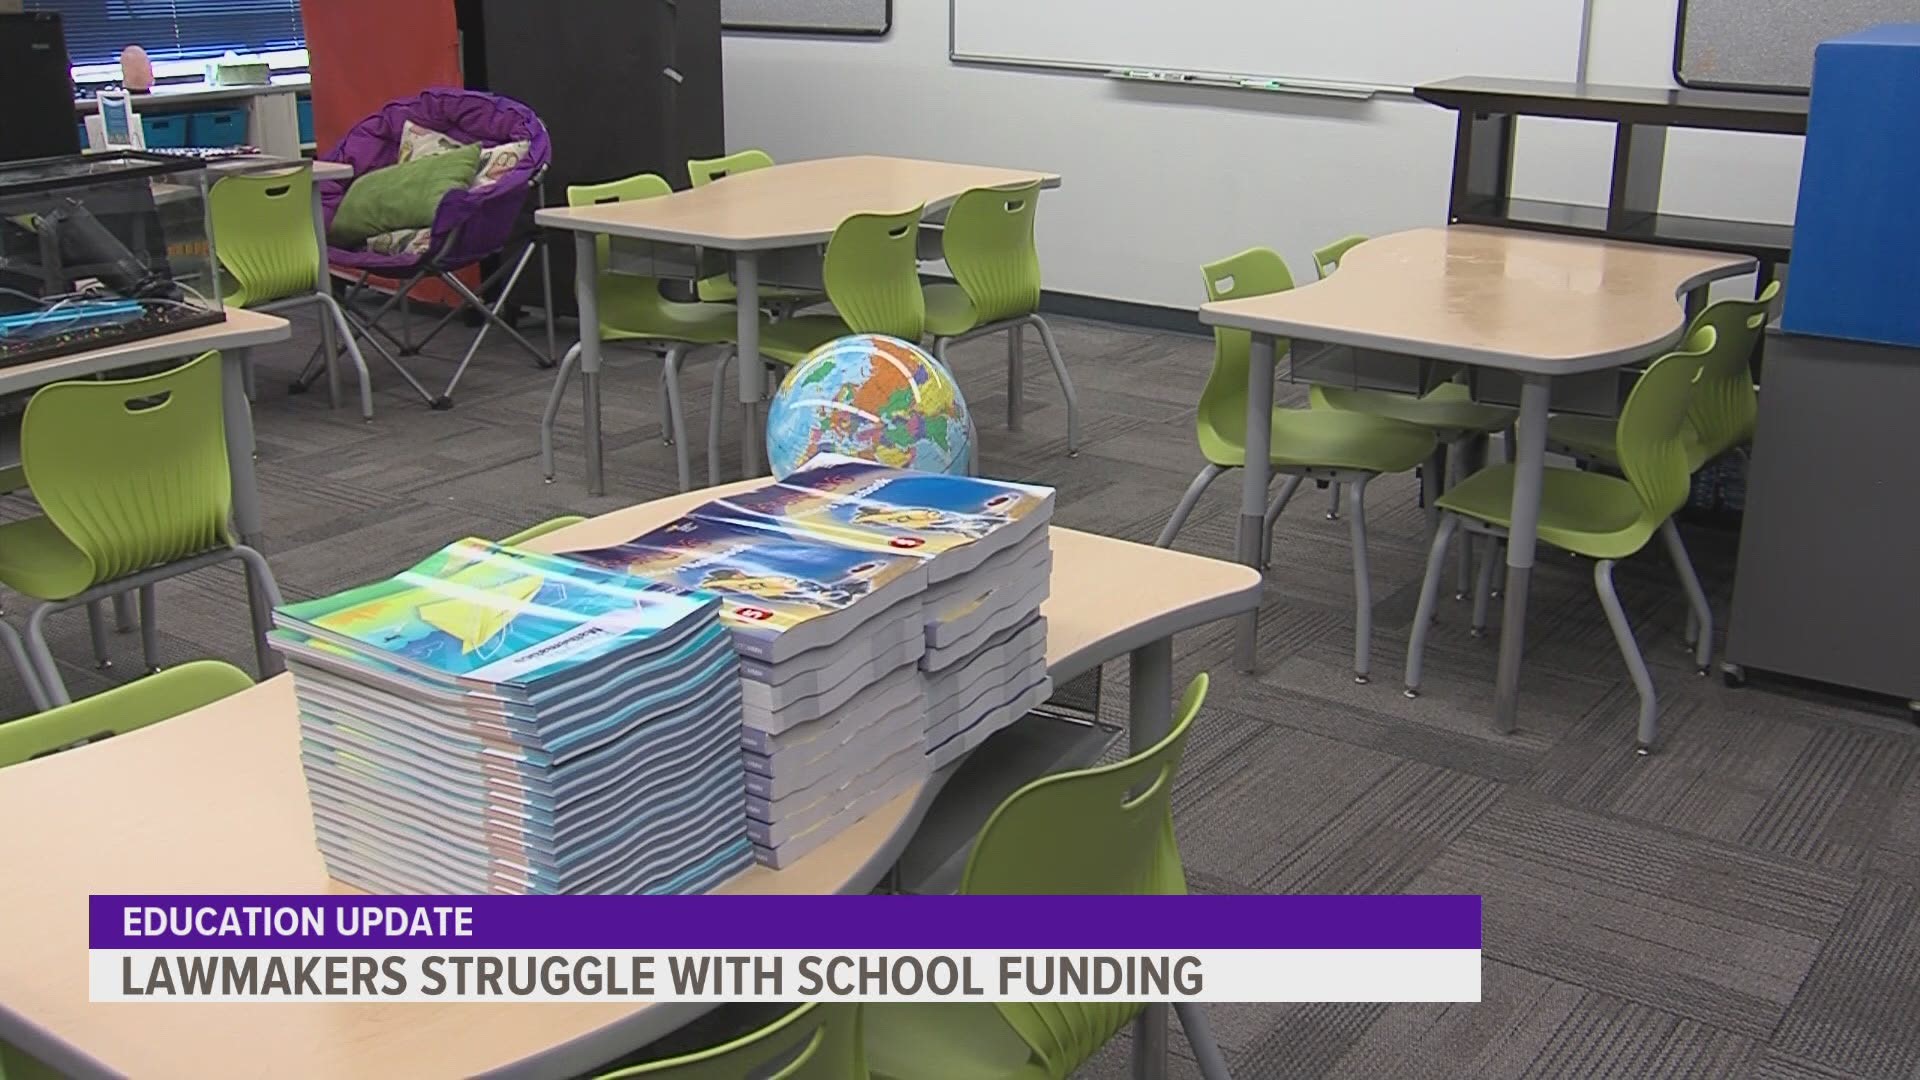 Lawmakers anticipate school budgeting will be harder this year due to lower enrollment numbers.